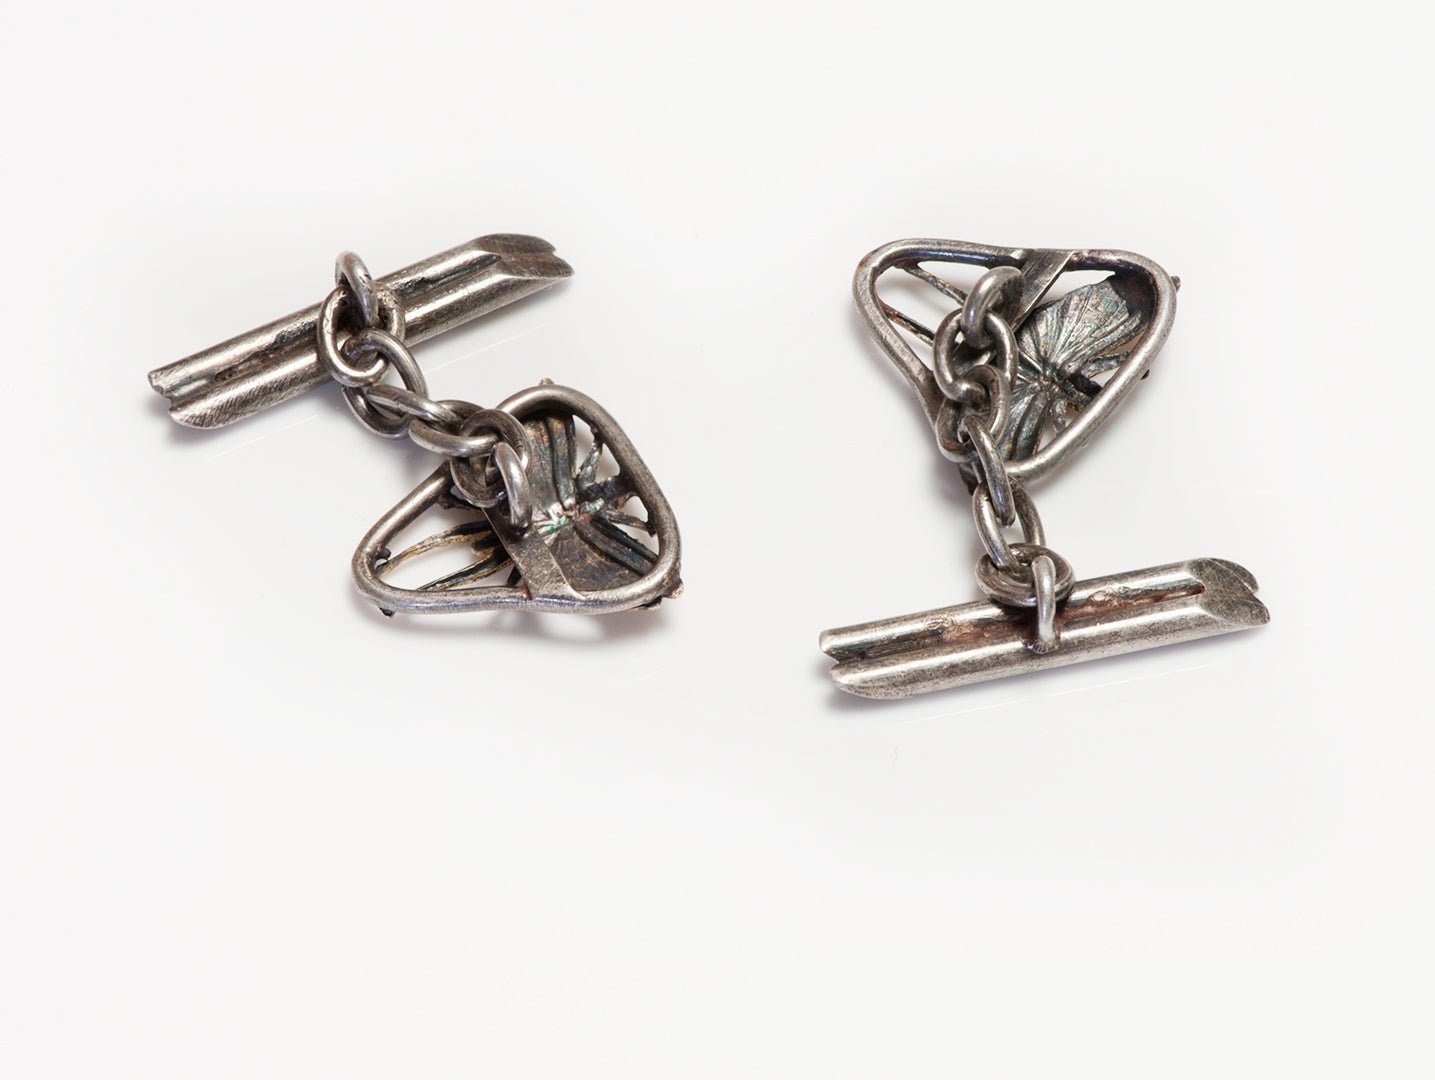 Antique Silver Gold Dragonfly Cufflinks - DSF Antique Jewelry